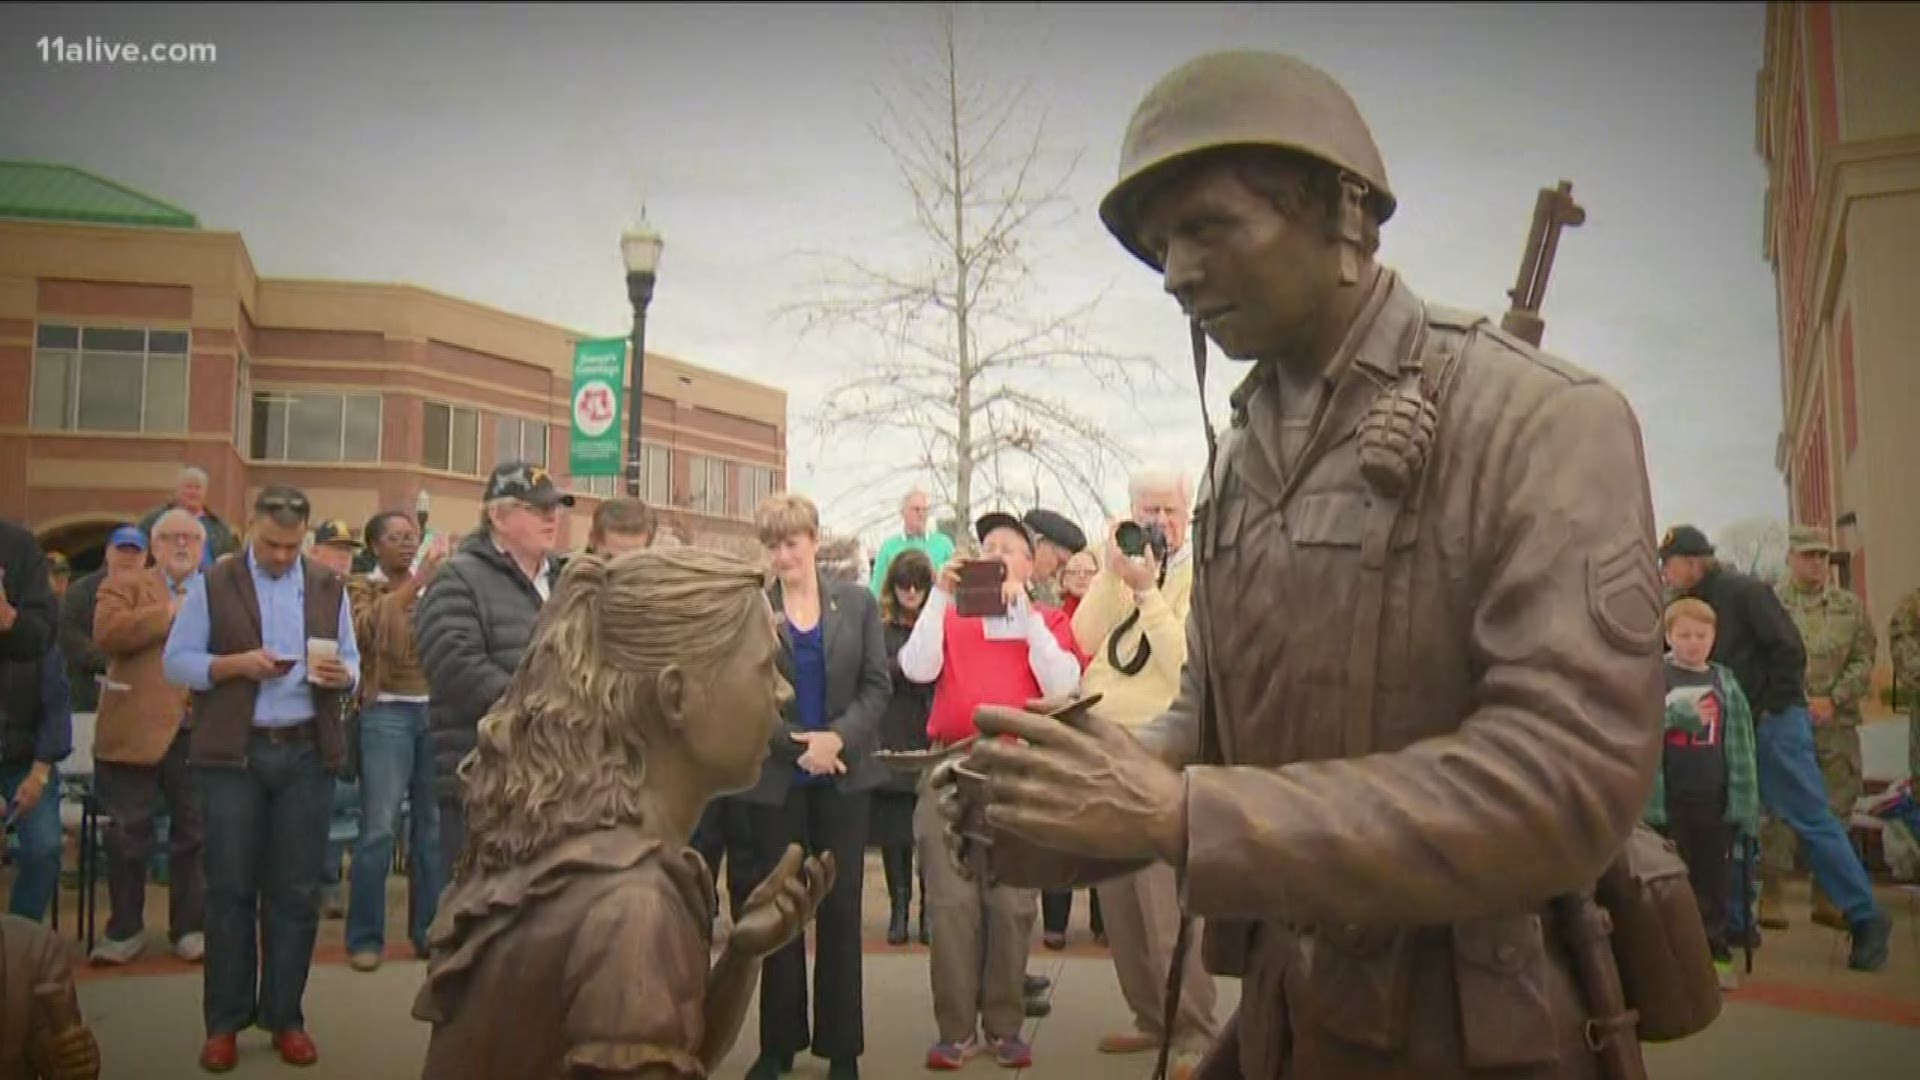 The statue was revealed in front in front of the Cumming Court House. It honored all veterans - especially those from WWII.